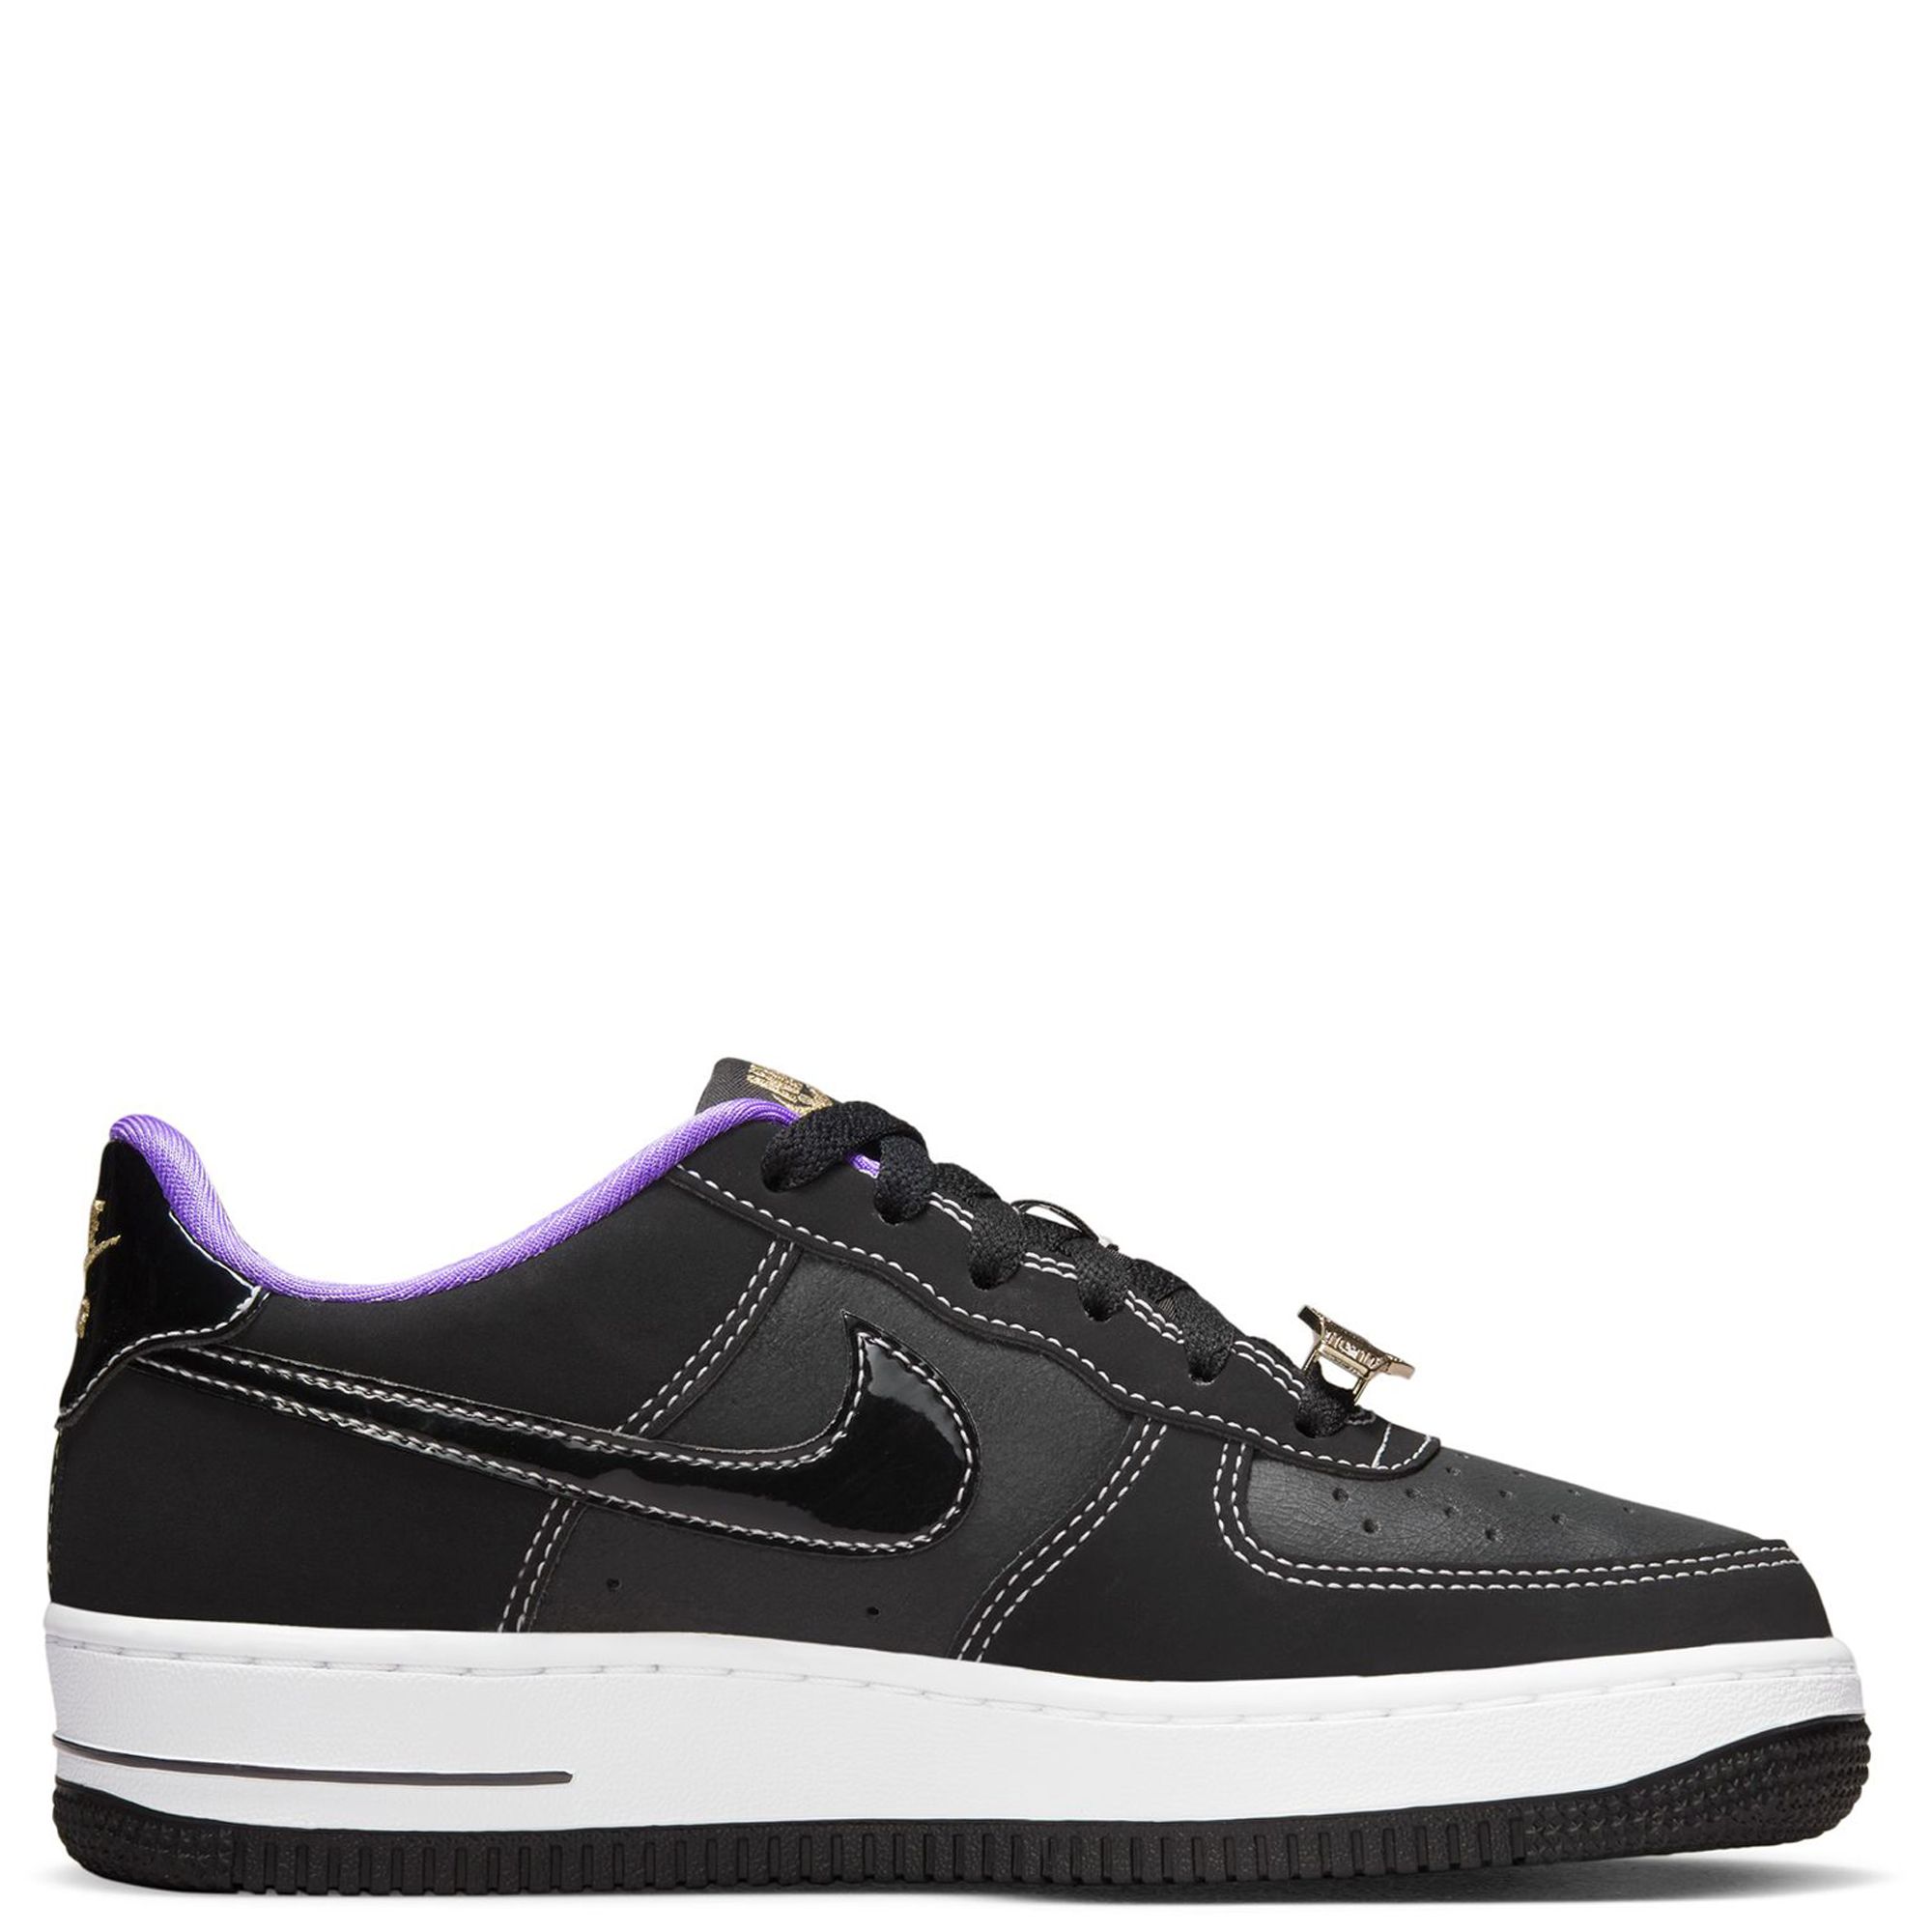 Nike Air Force 1 LV8 DQ0300-001 Older Kids Black & Iron Gray Leather Shoes  ER859 (5.5) 